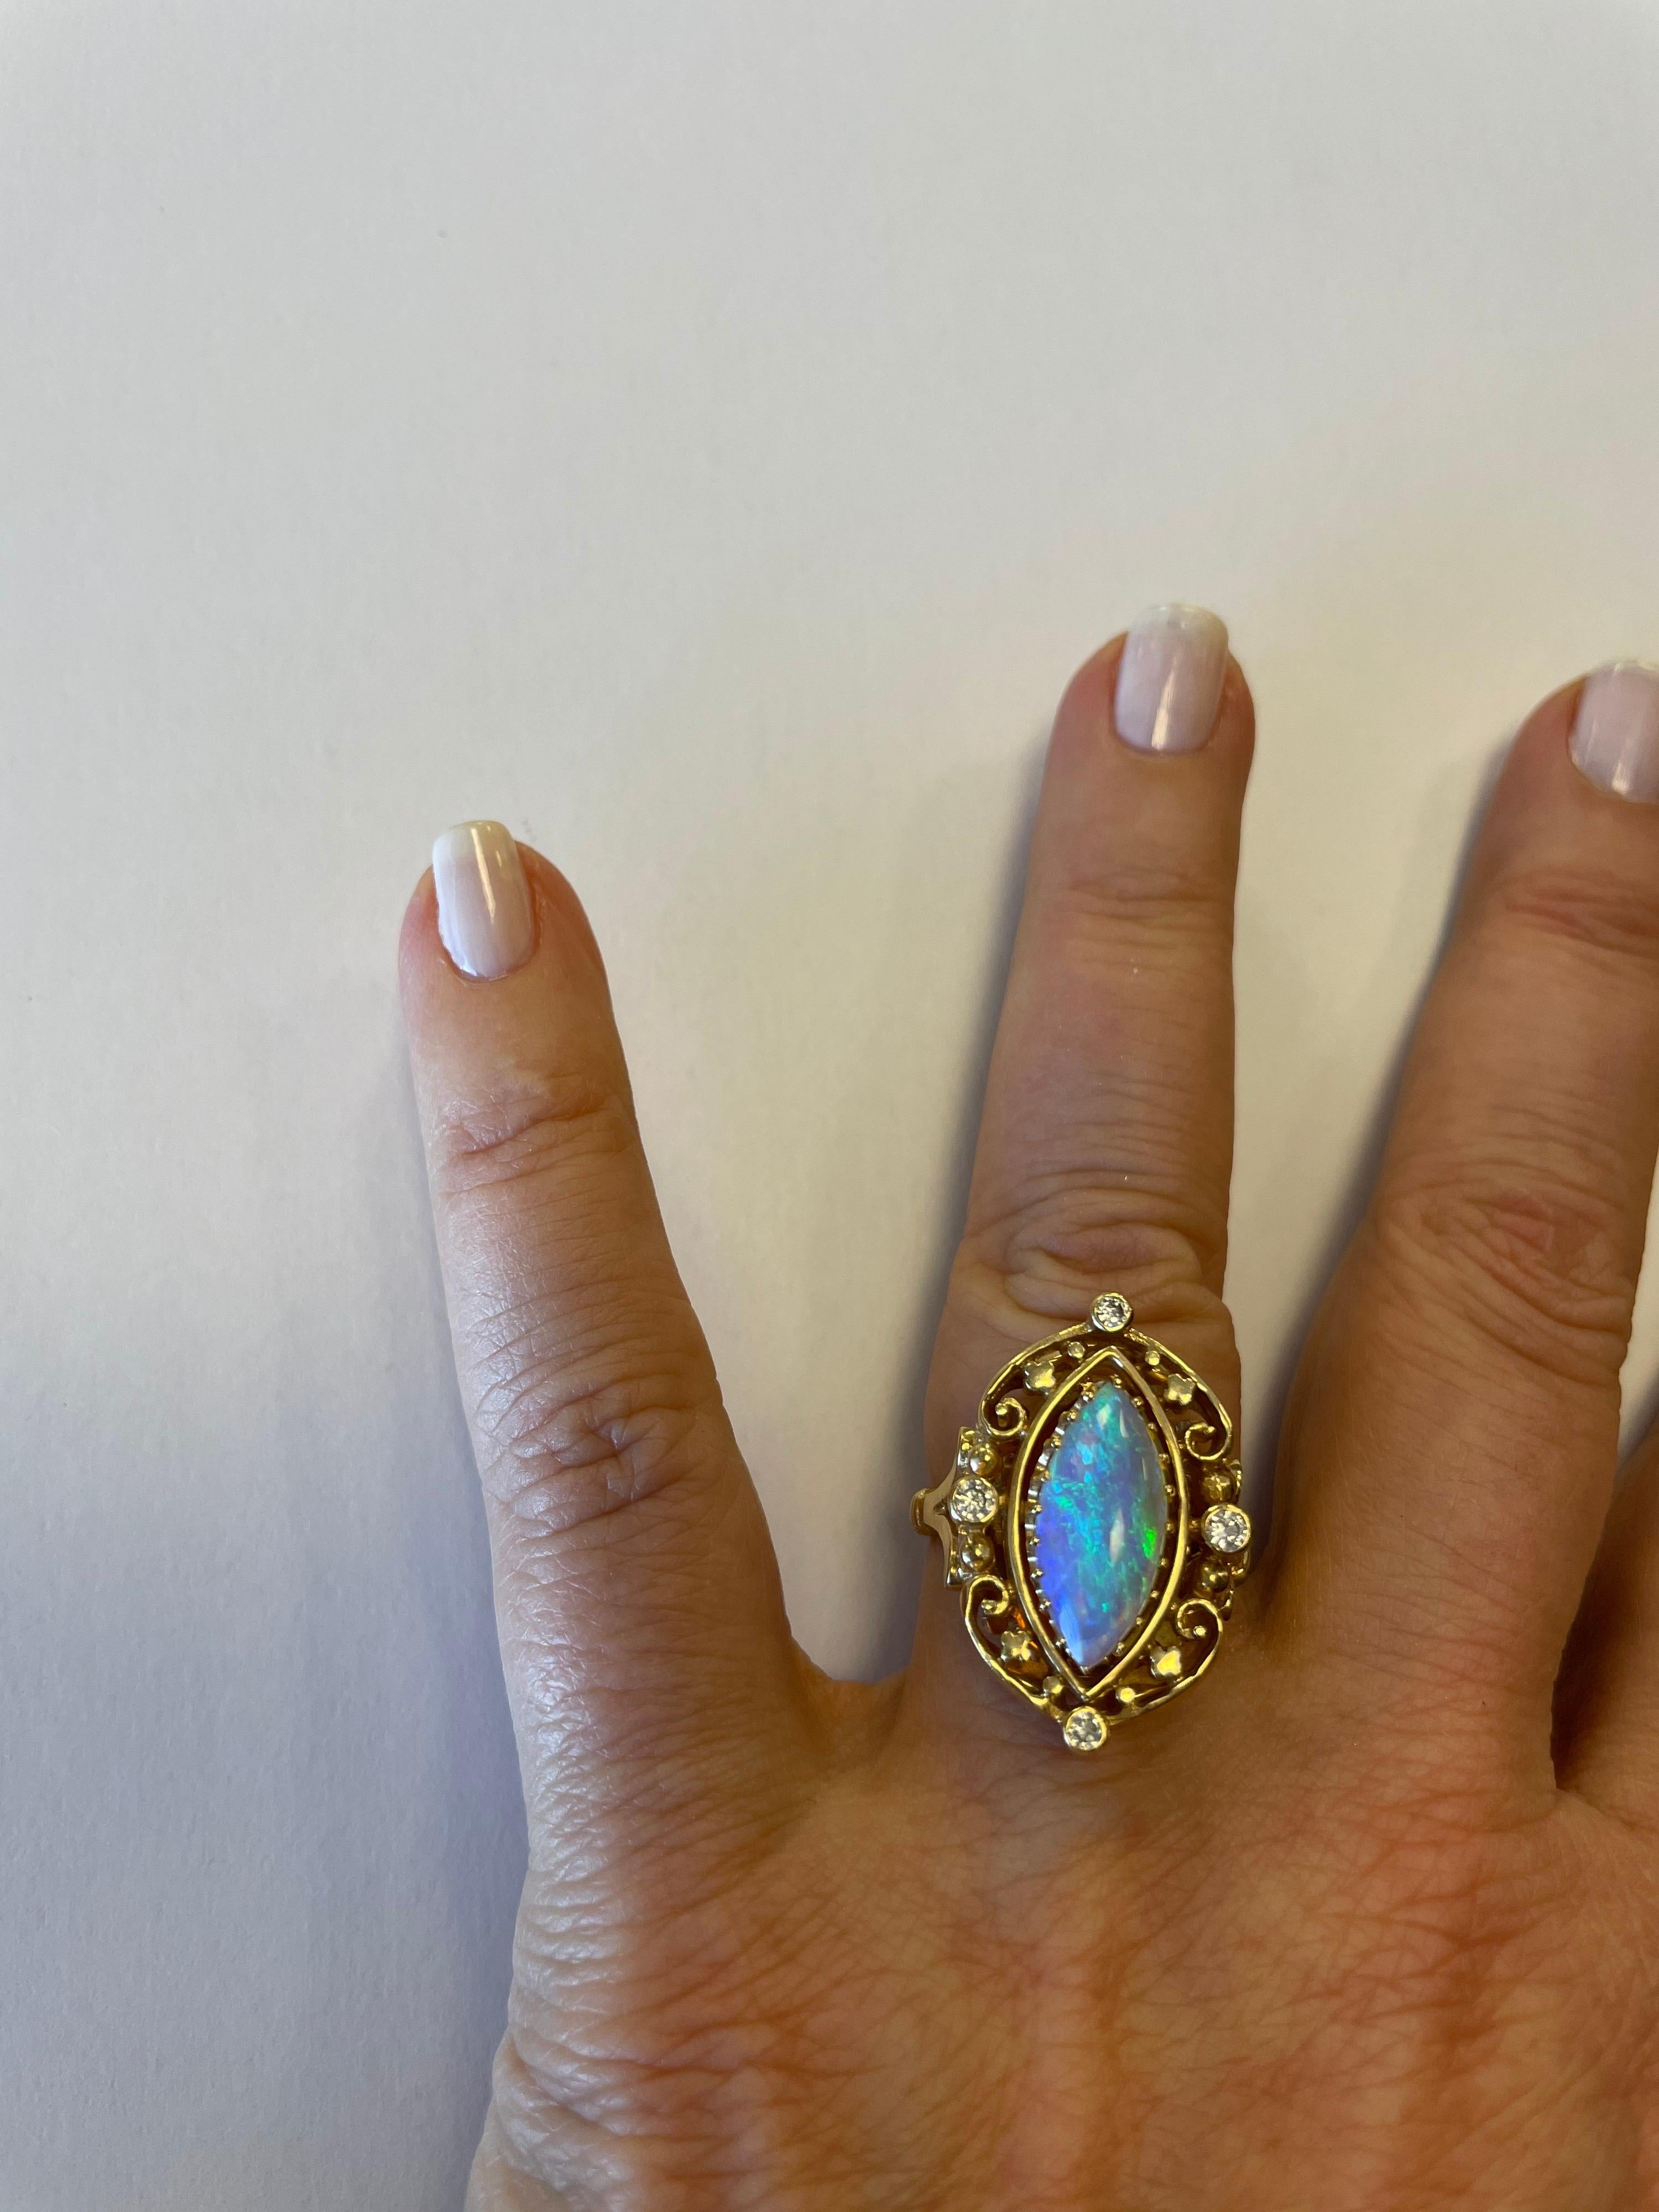 Vintage design, 14K yellow gold ring, prong set with Marquise shaped Opal measuring  16mm x 8mm and 4 full cut round diamonds weighing .20cts total
finger size 5, may be resized